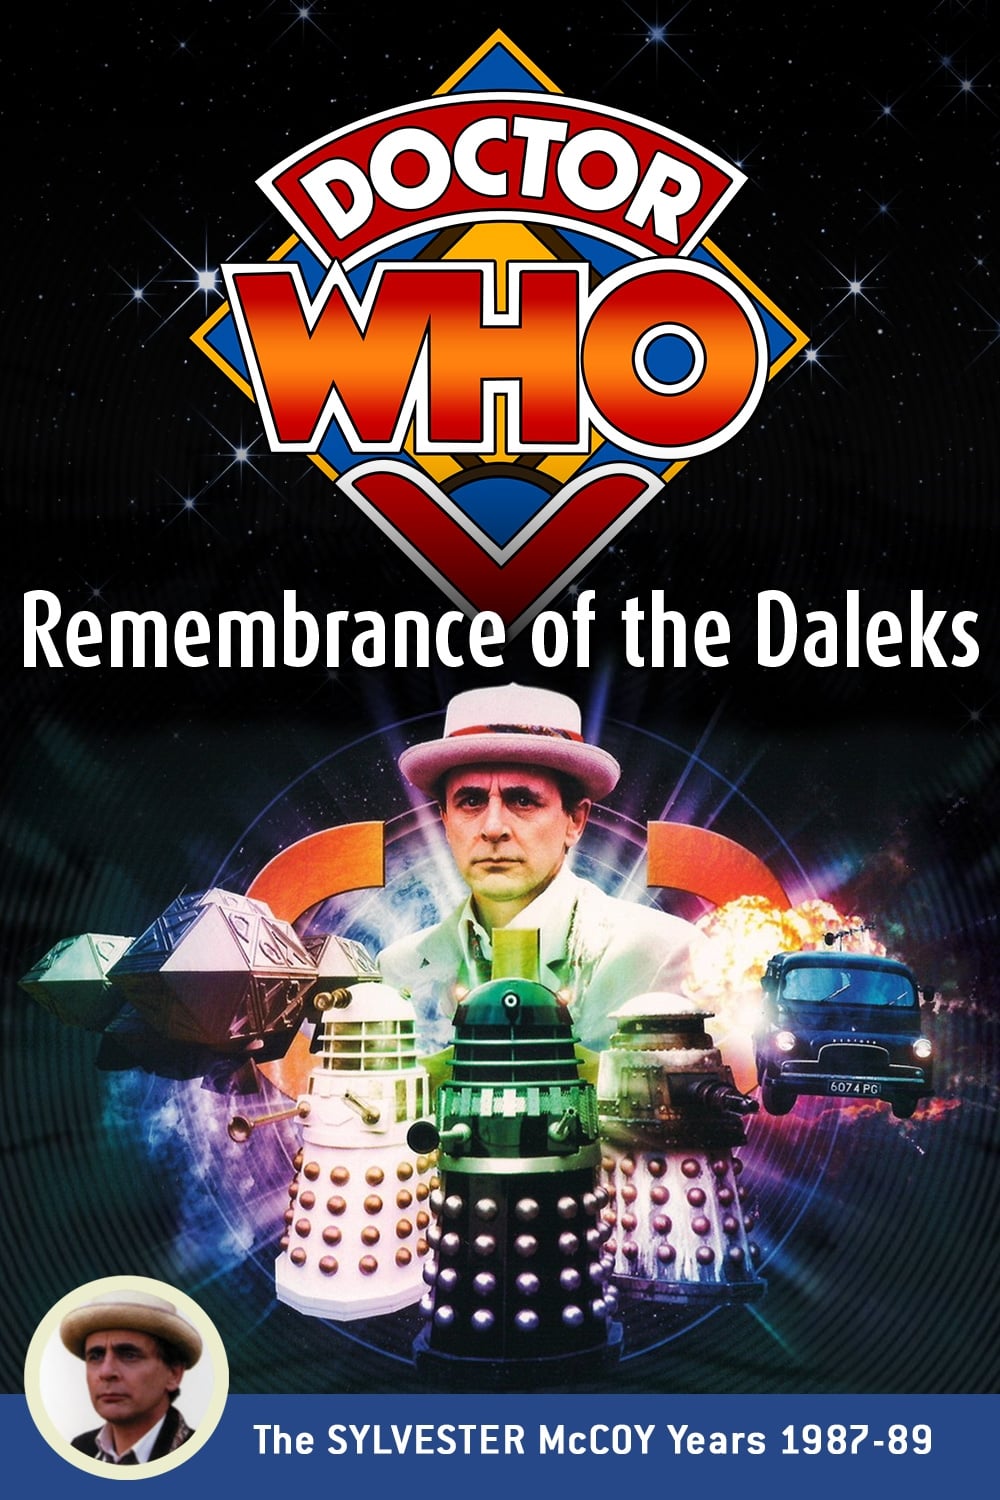 Doctor Who: Remembrance of the Daleks film